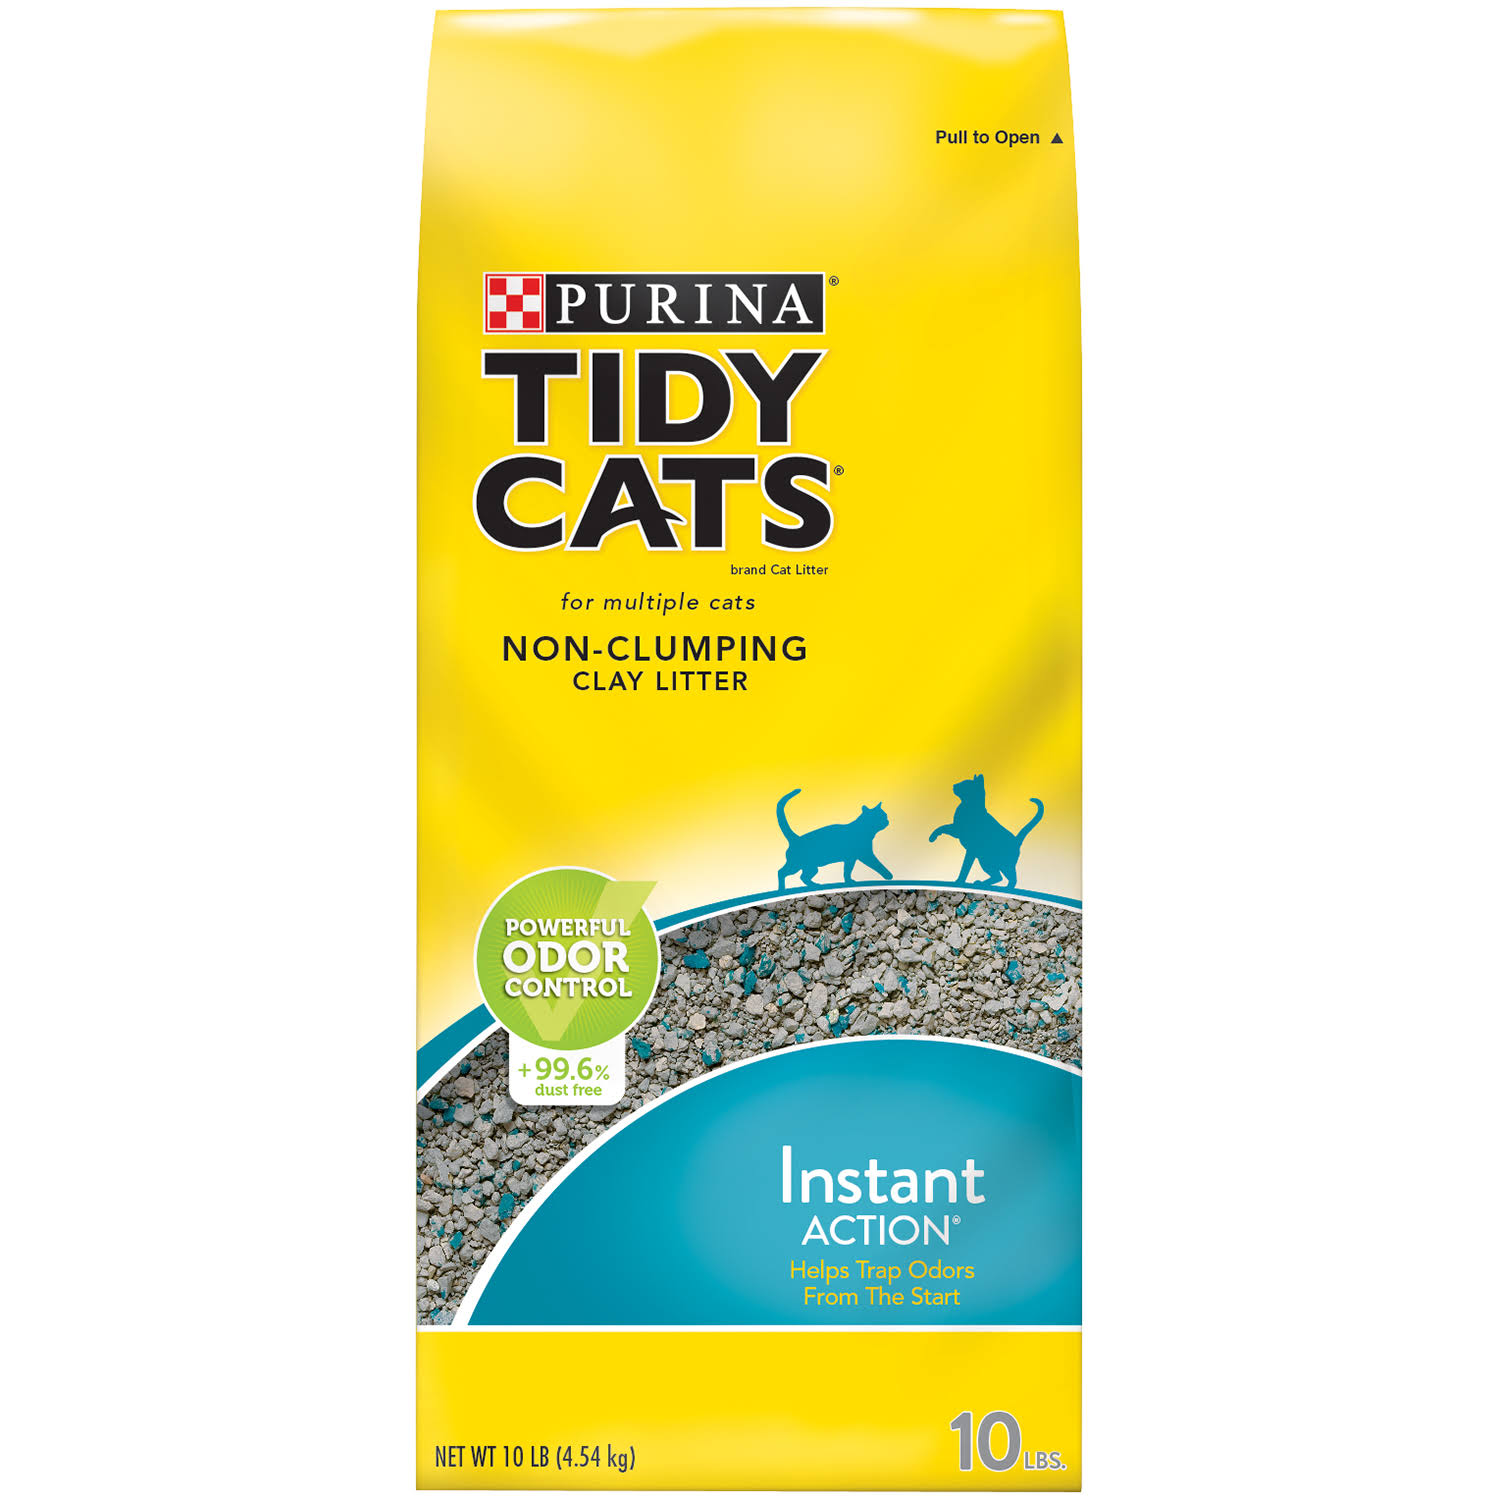 Purina Tidy Cats Non-Clumping Cat Litter Instant Action For Multiple Cats - 4.5kg